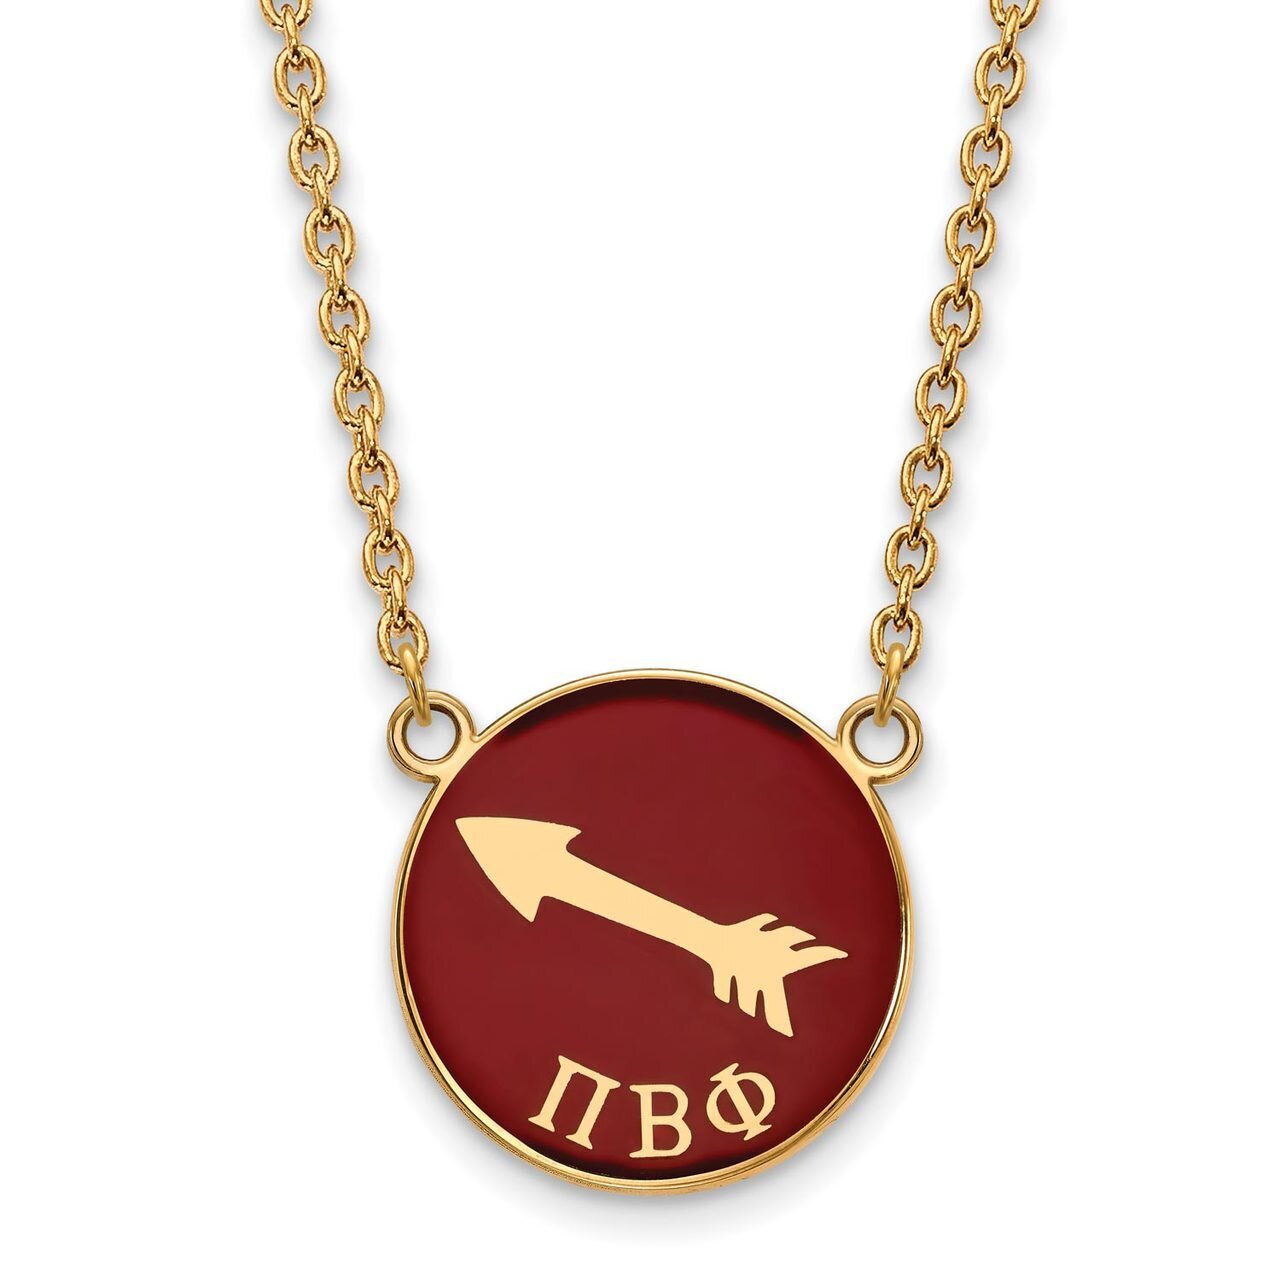 Pi Beta Phi Small Enameled Pendant with 18 Inch Chain Gold-plated Silver GP043PBP-18